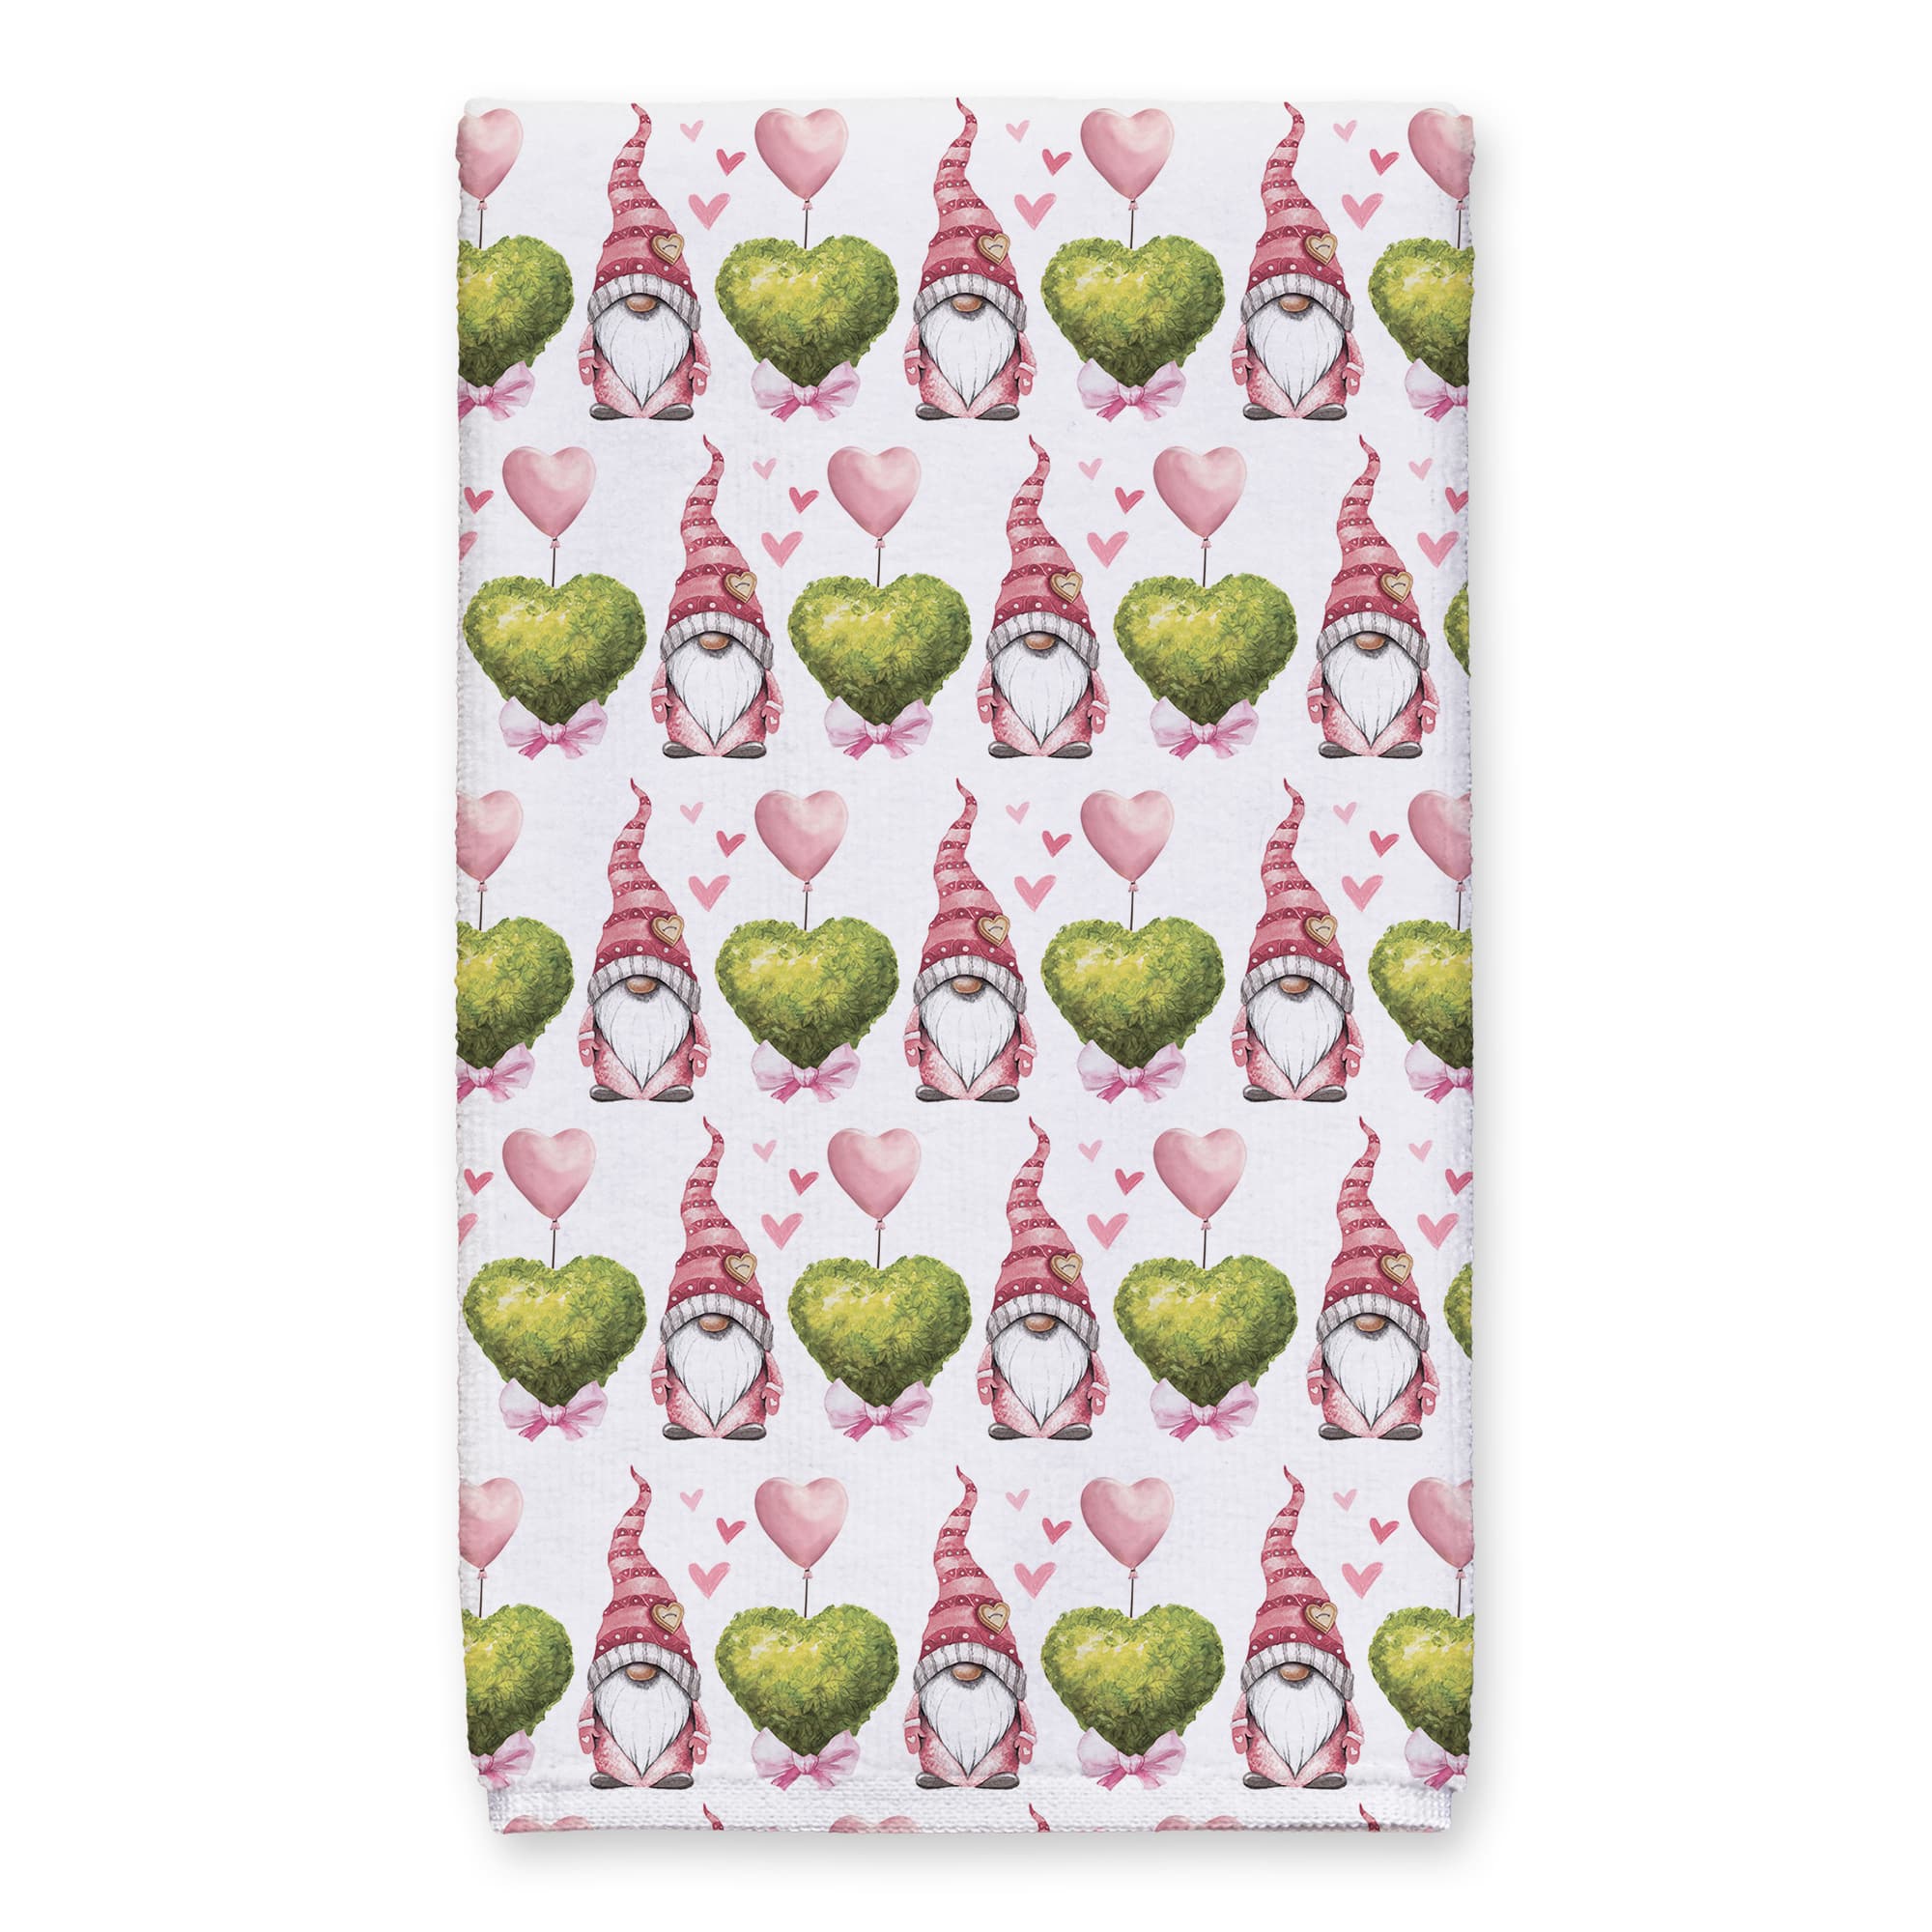 Gnome-Body Loves You as Much as Me Tea Towel - Set of 2